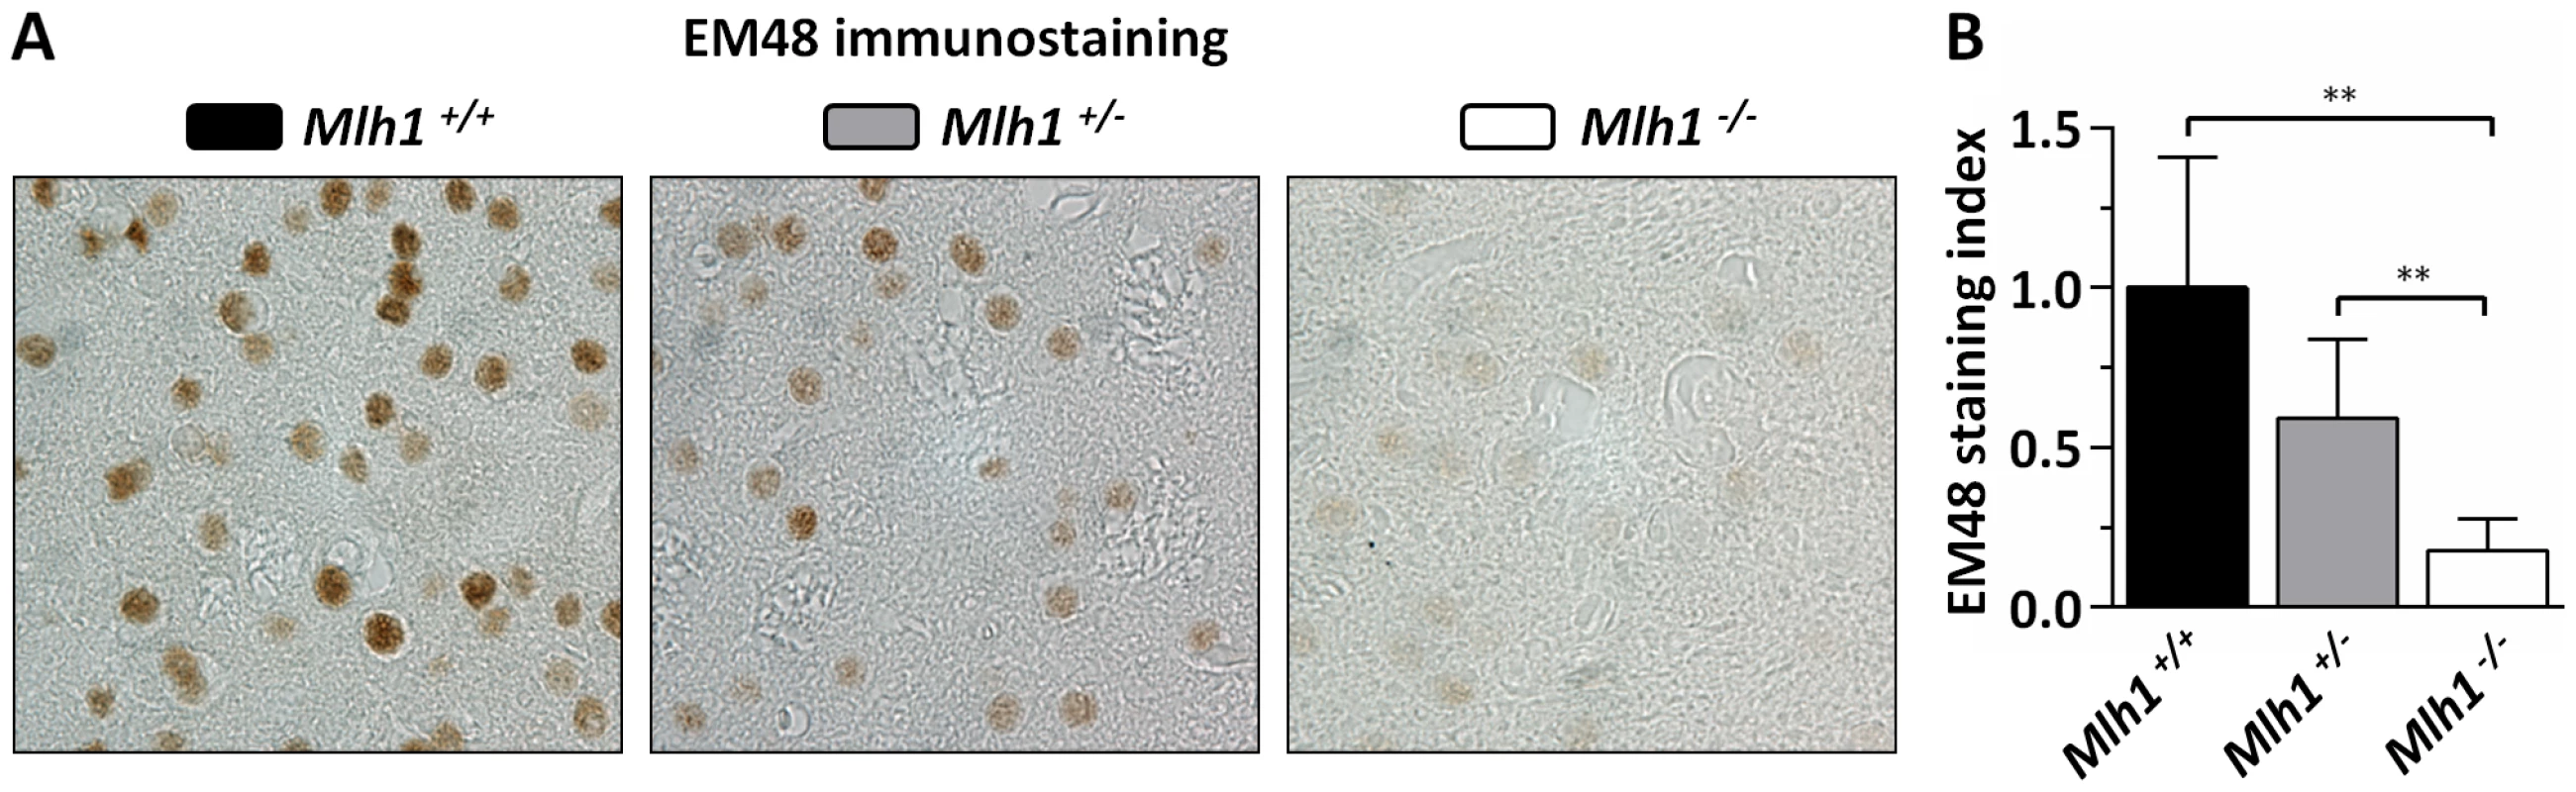 <i>Mlh1</i> is an enhancer of nuclear mutant huntingtin immunostaining in B6.<i>Hdh<sup>Q111/+</sup></i> mice.